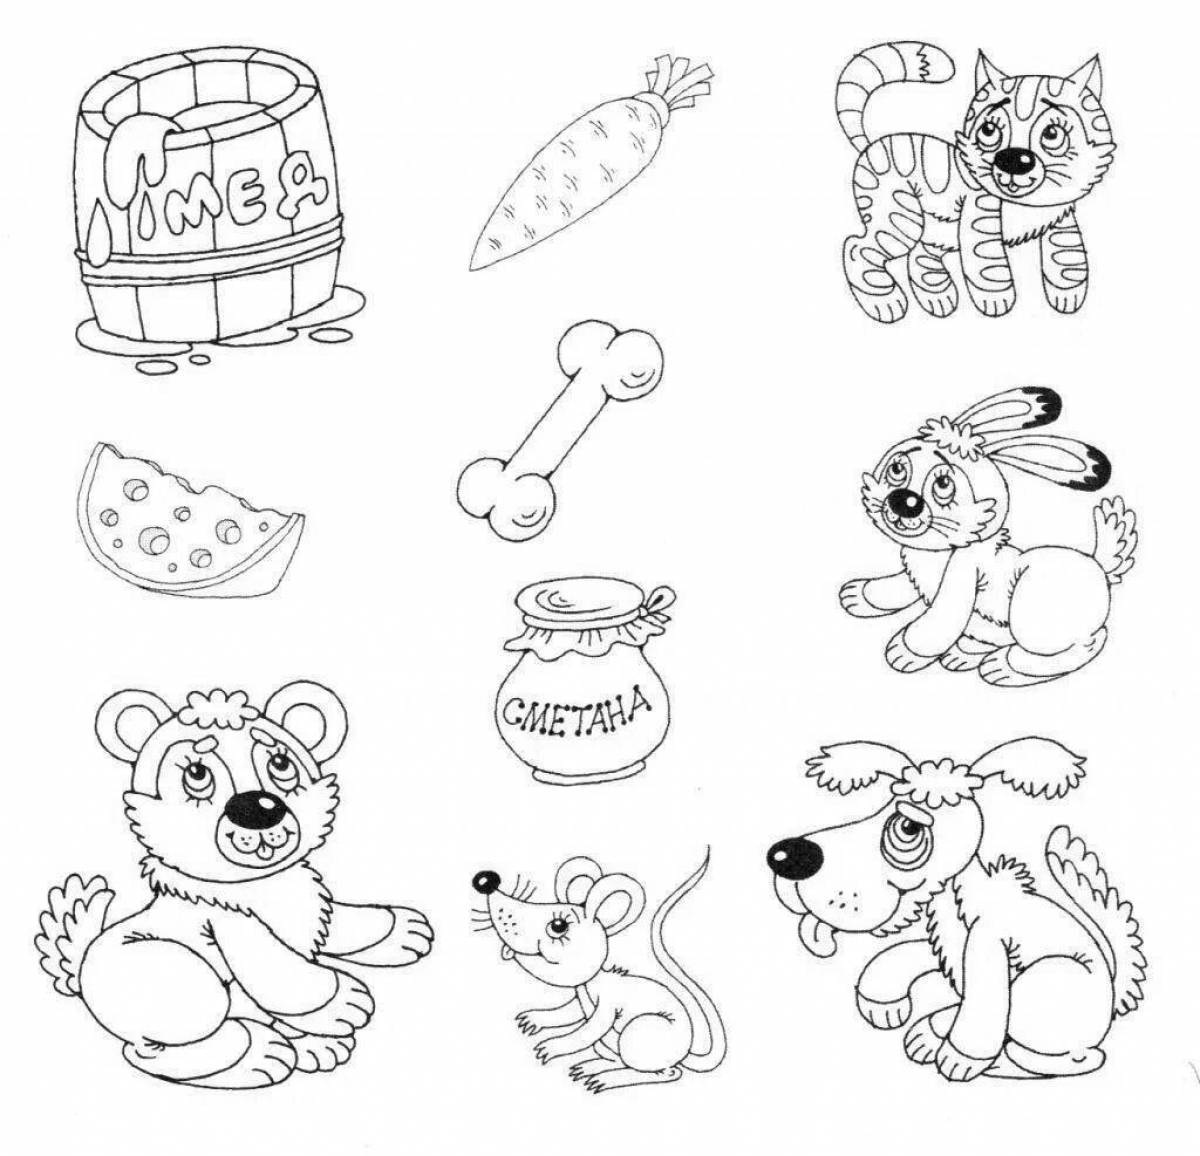 Fun coloring games for 5 year olds